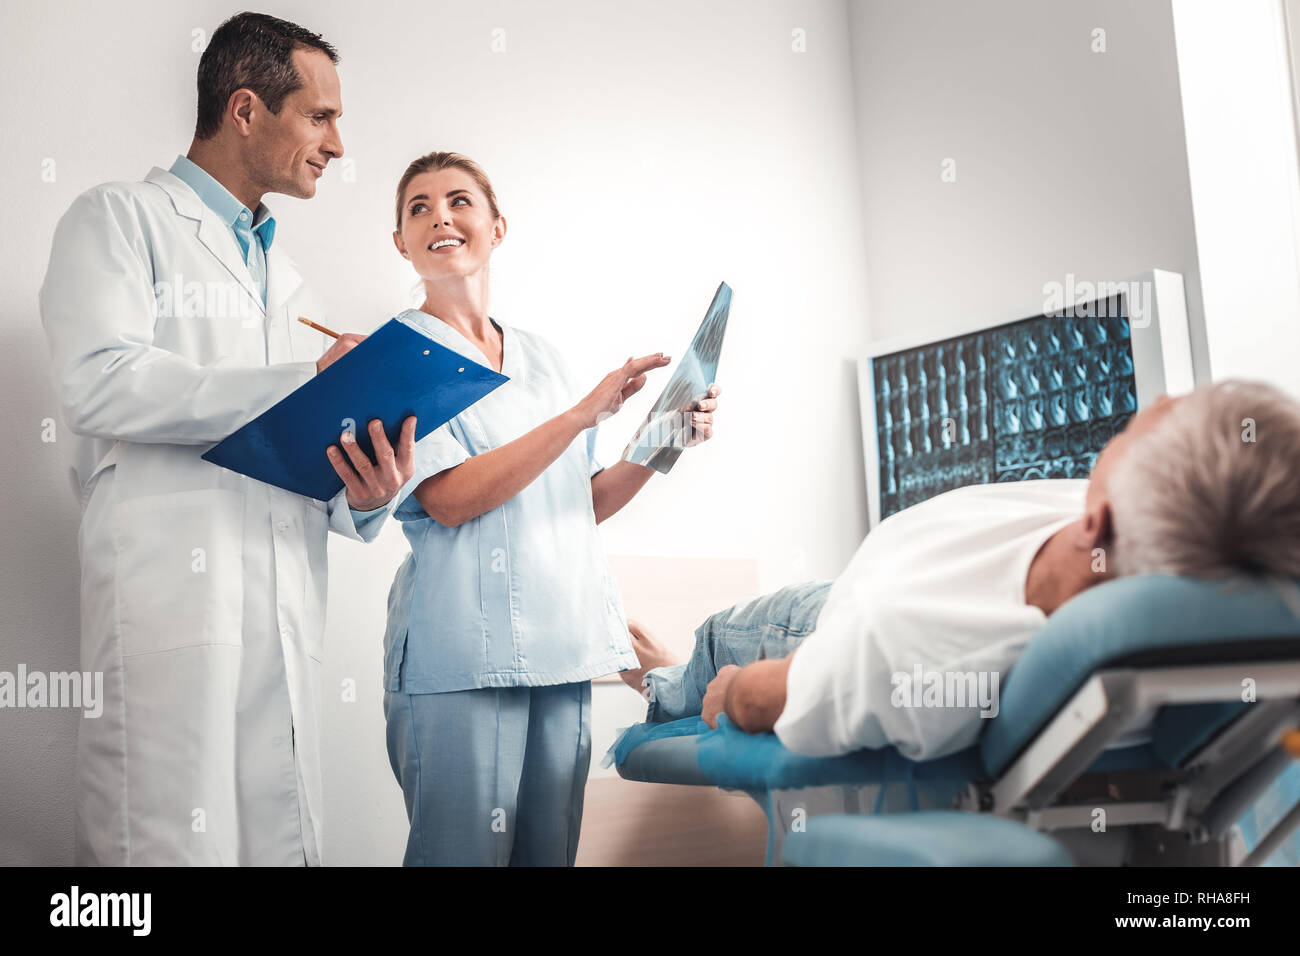 Two professional doctors feeling contended after getting results of x-ray Stock Photo